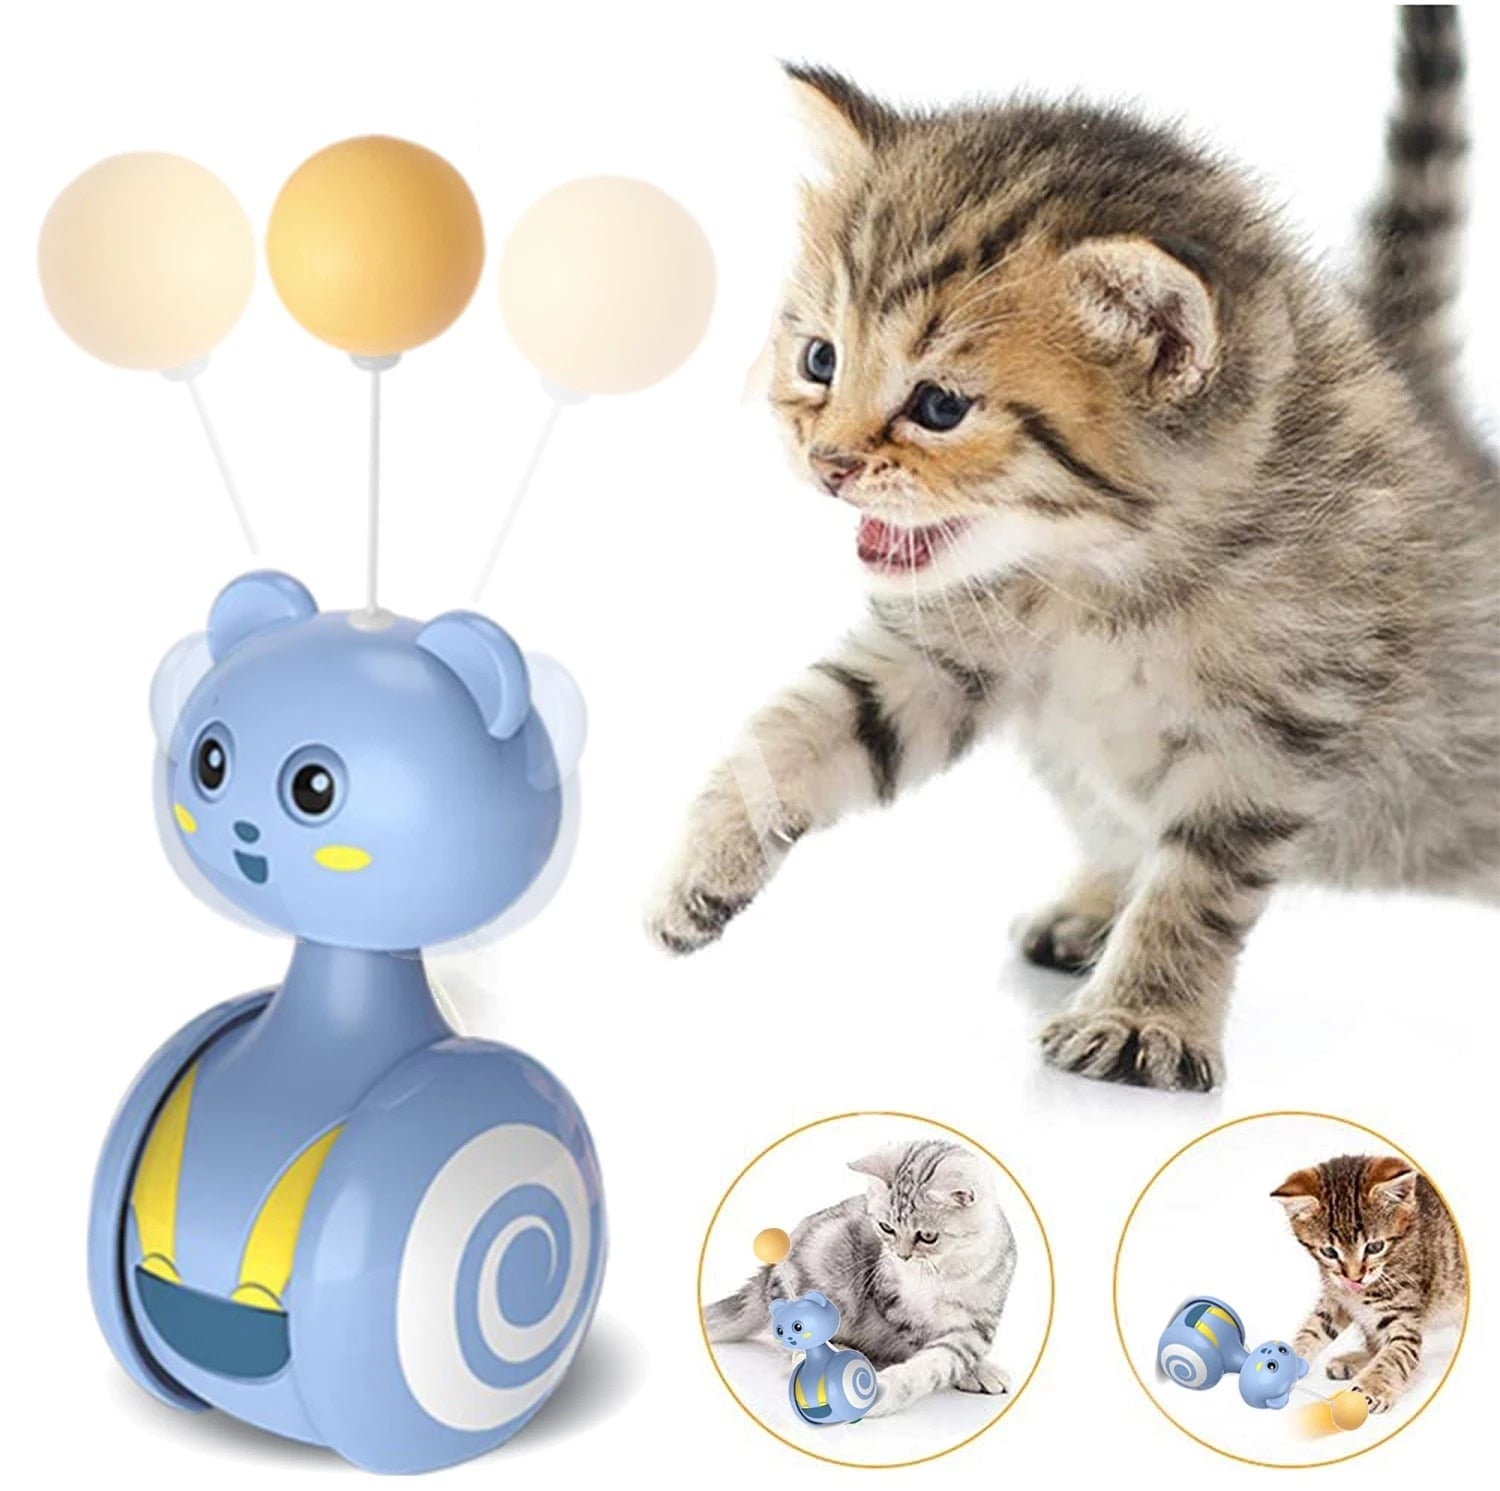 Tumbler Swing Toys for Cats